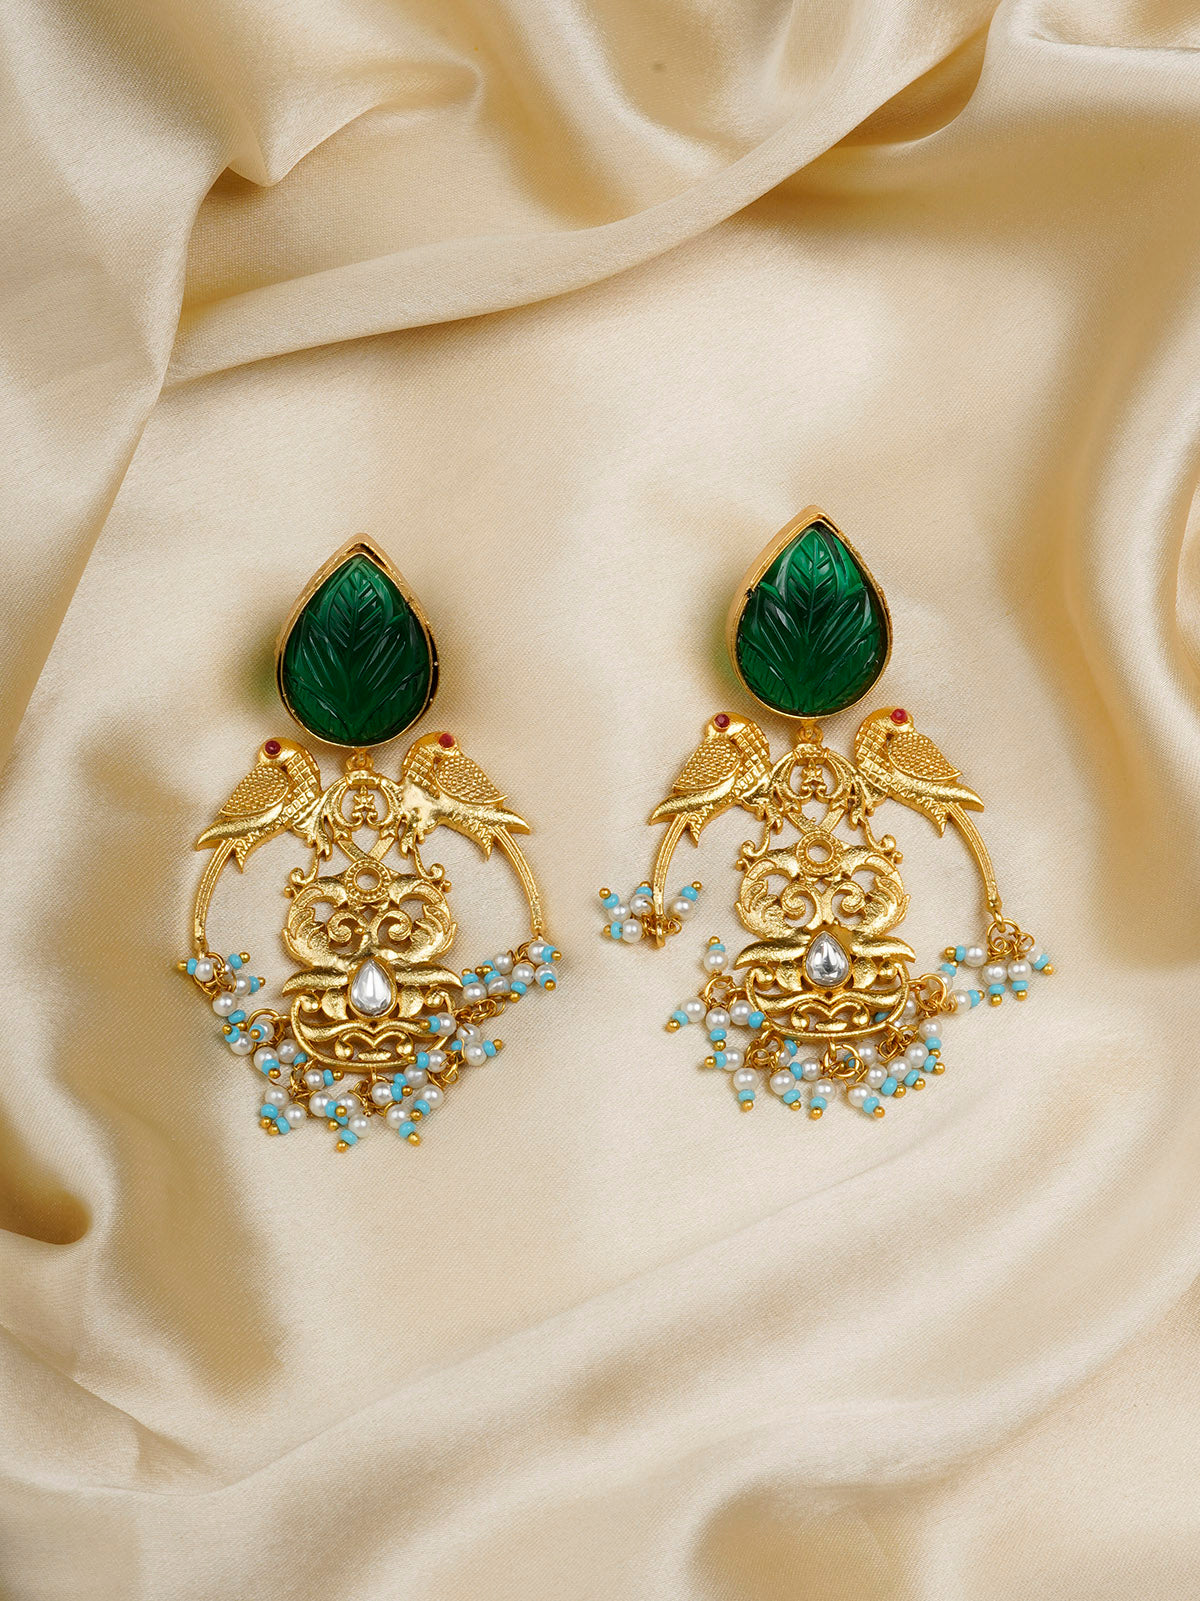 MR-E189M - Green Color Gold Plated Mishr Earrings